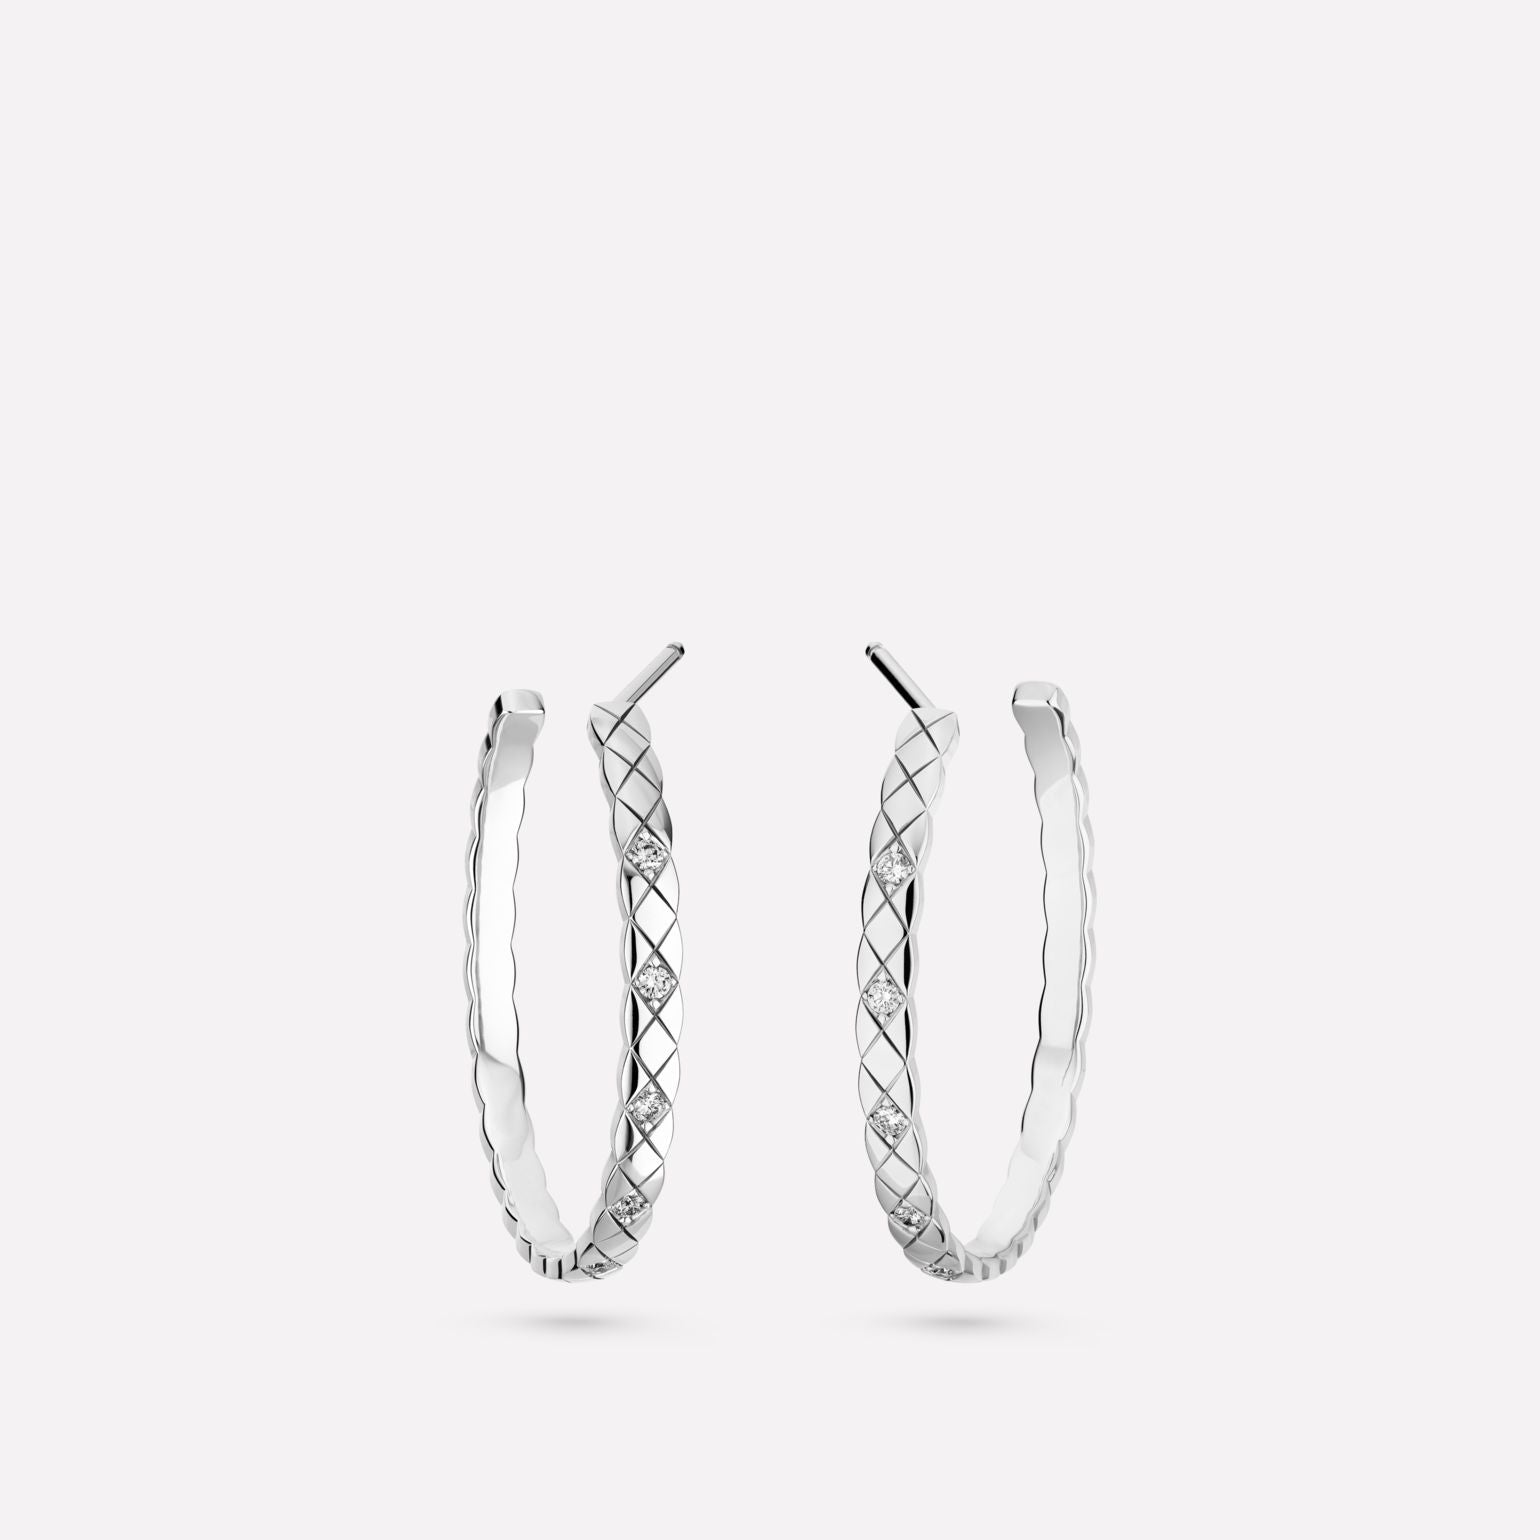 COCO HOOP EARRINGS QUILTED MOTIF, 18K WHITE GOLD, DIAMONDS